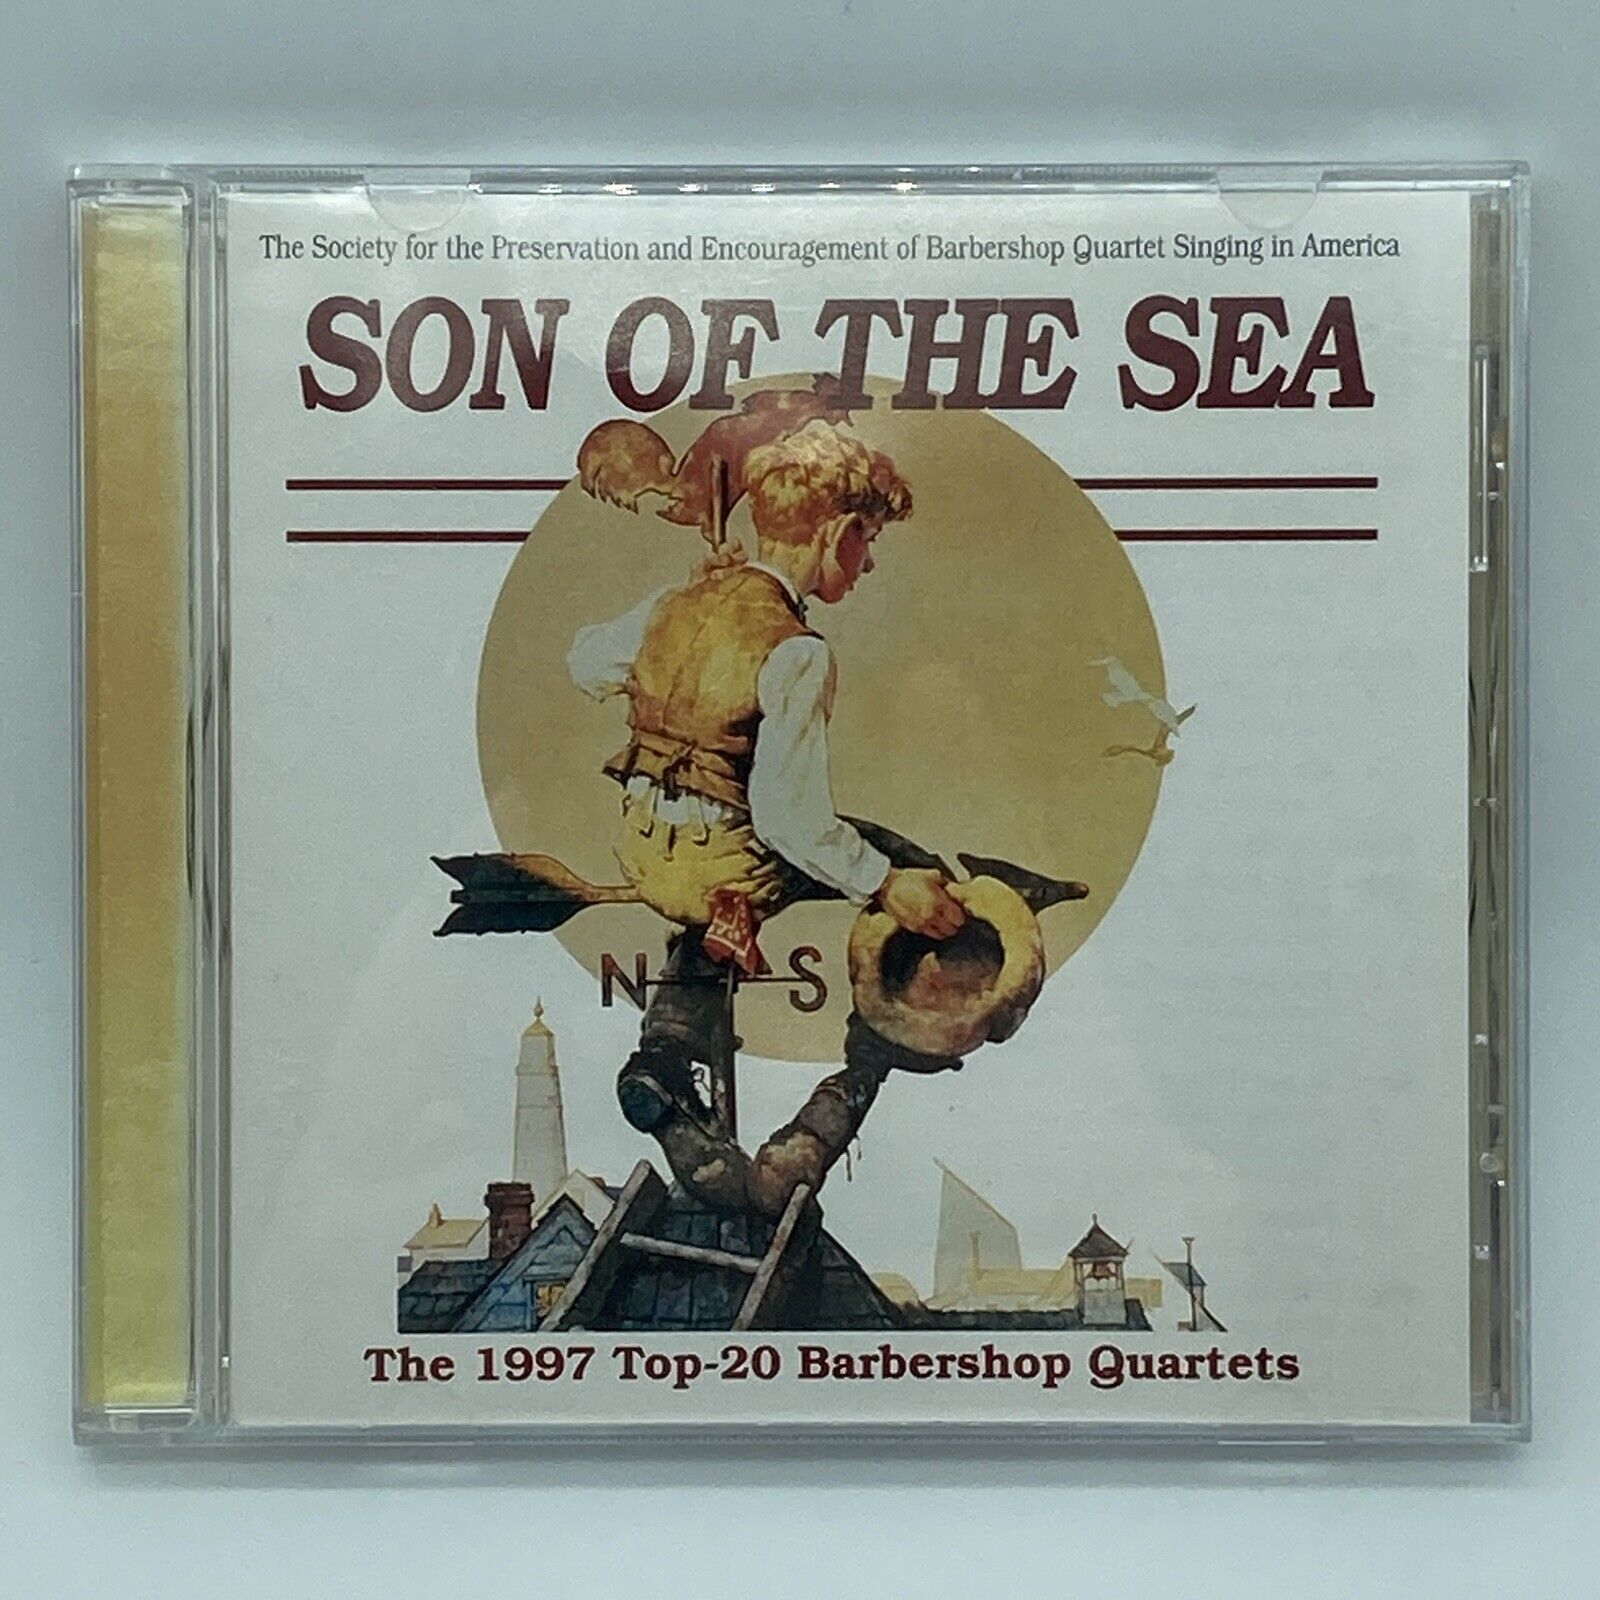 "Son of the Sea: The 1997 Top-20 Barbershop Quartets" CD OOP SPEBSQSA Intersound